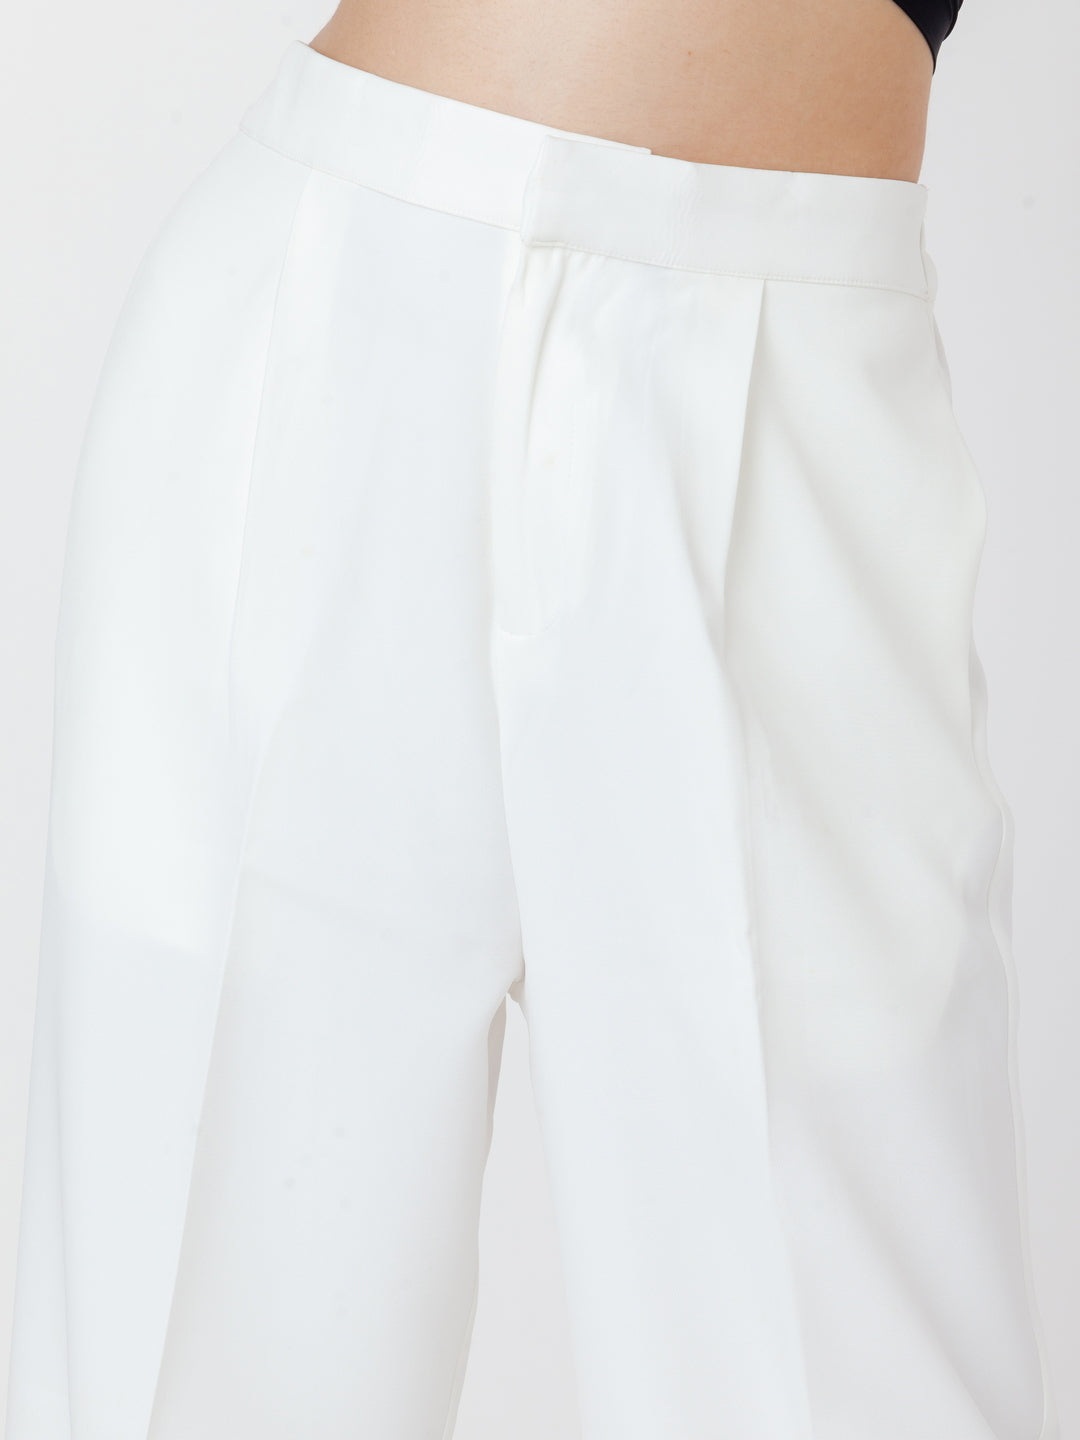 White-Solid-Pleated-Trouser-L01008-6